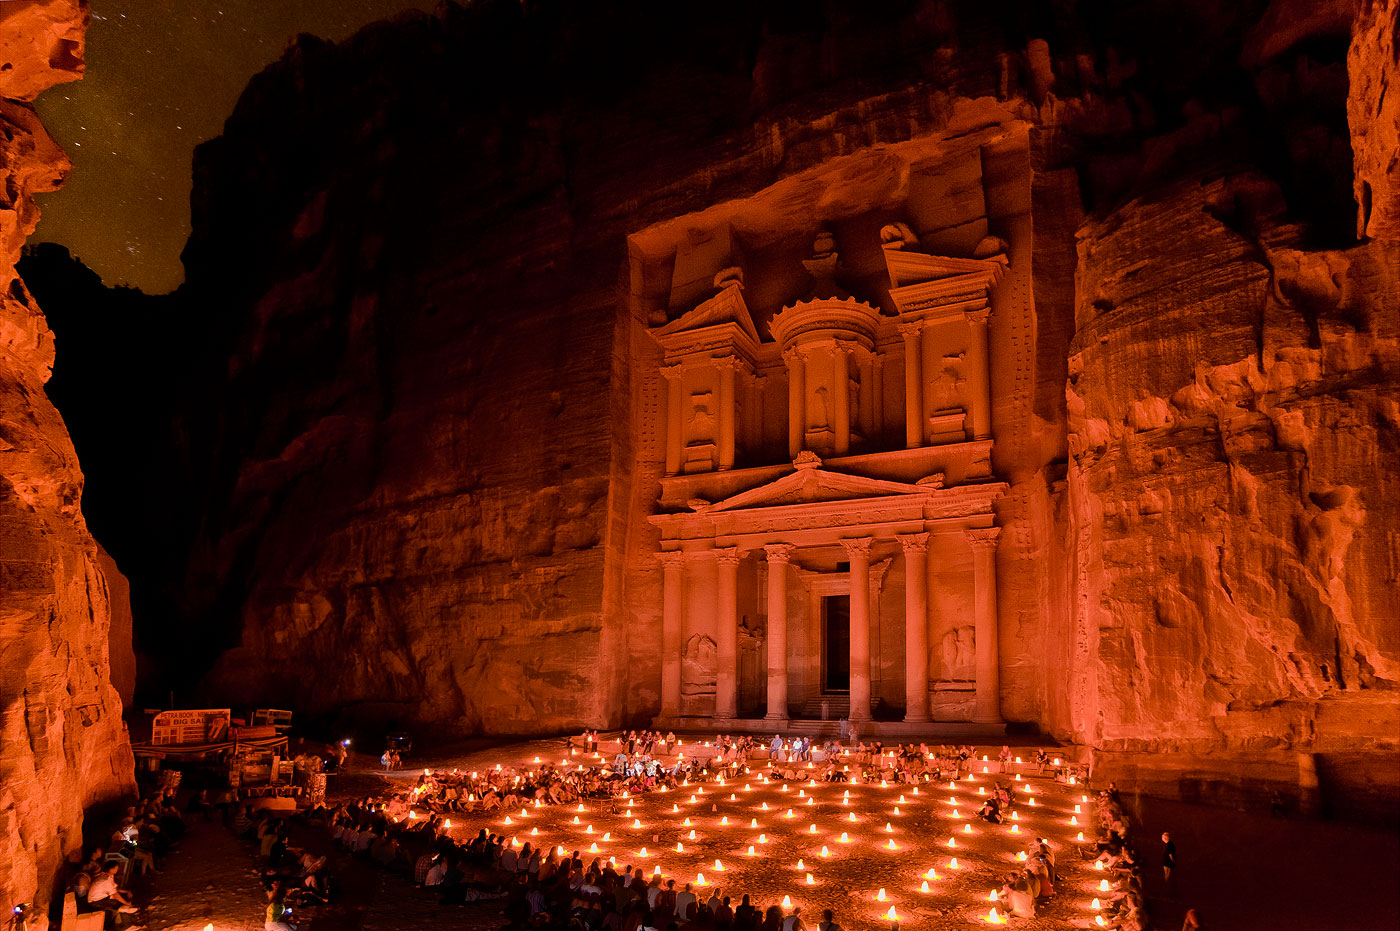 No. 11: Experience «Petra by Night» at candle-lit Khazneh and listen to the haunting music of the Bedouins - Petra, Jordan, 2008